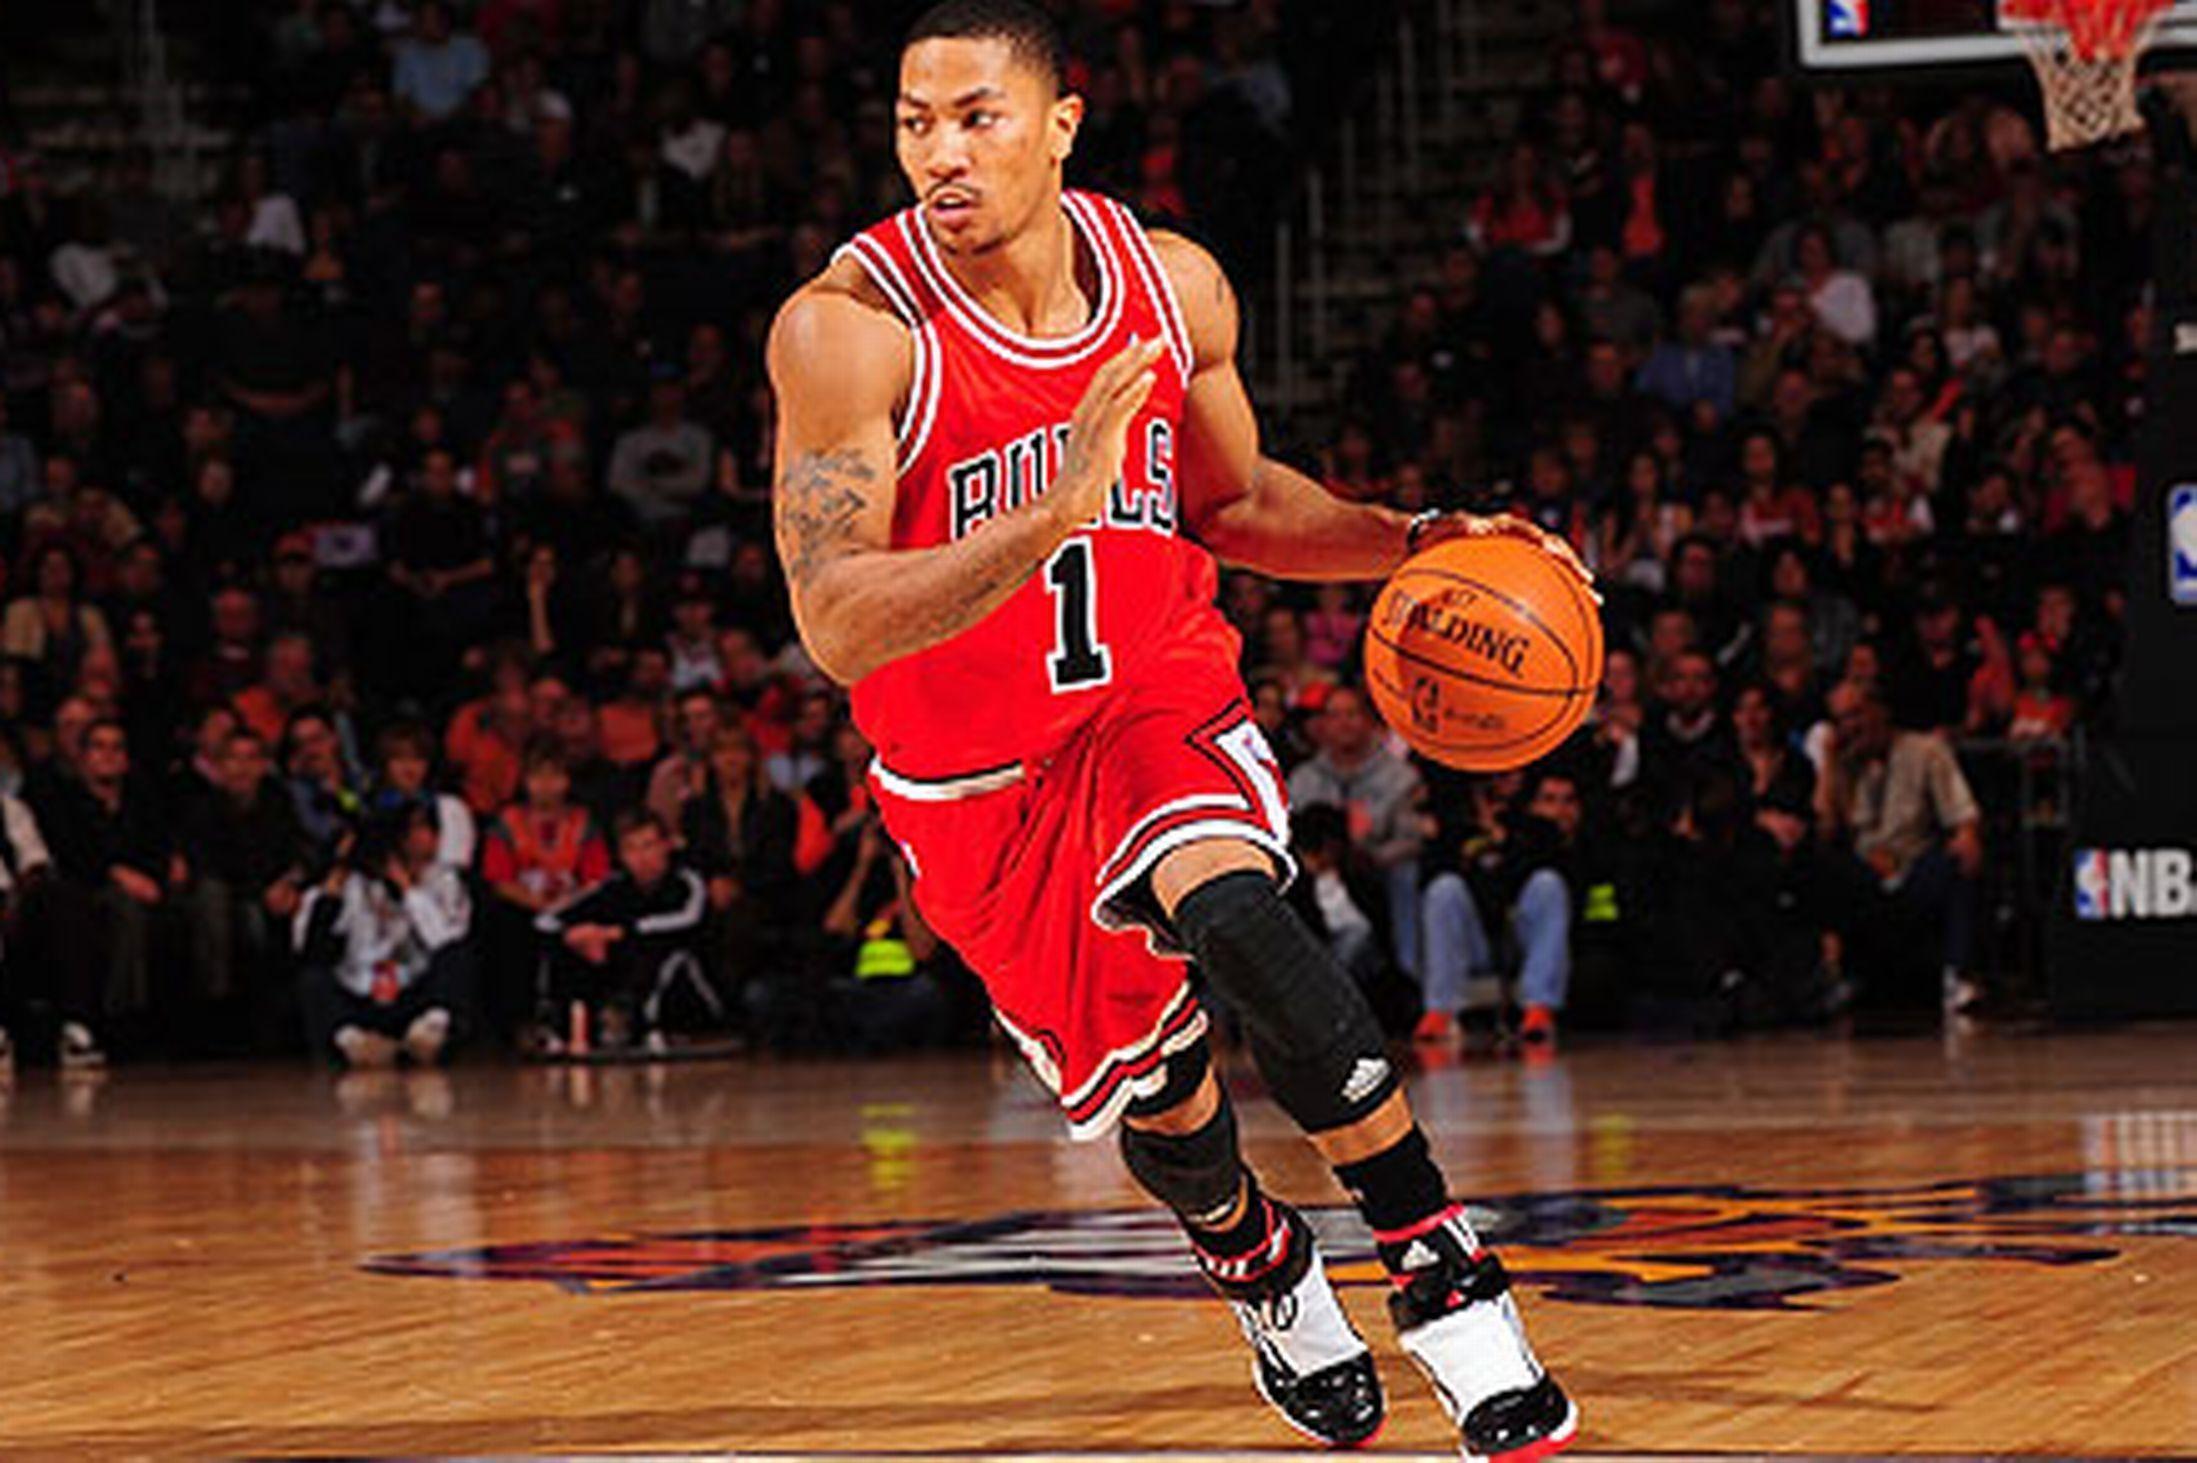 Jersey of the Day: Derrick Rose